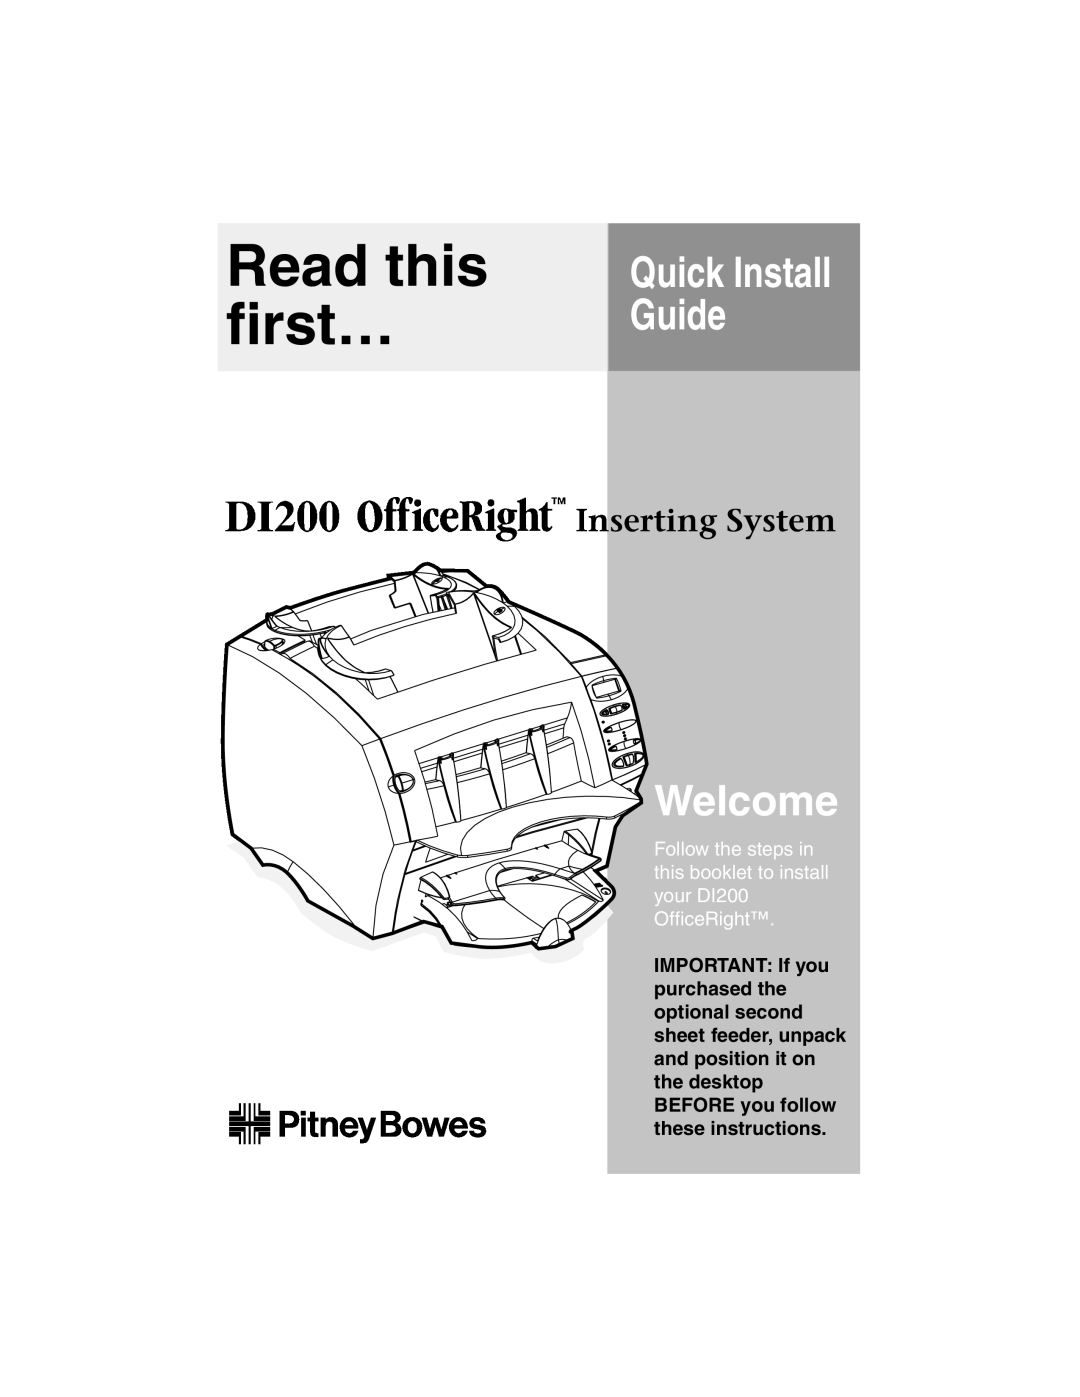 Pitney Bowes DI200 manual Read this first…, Welcome, Quick Install Guide, Inserting System 